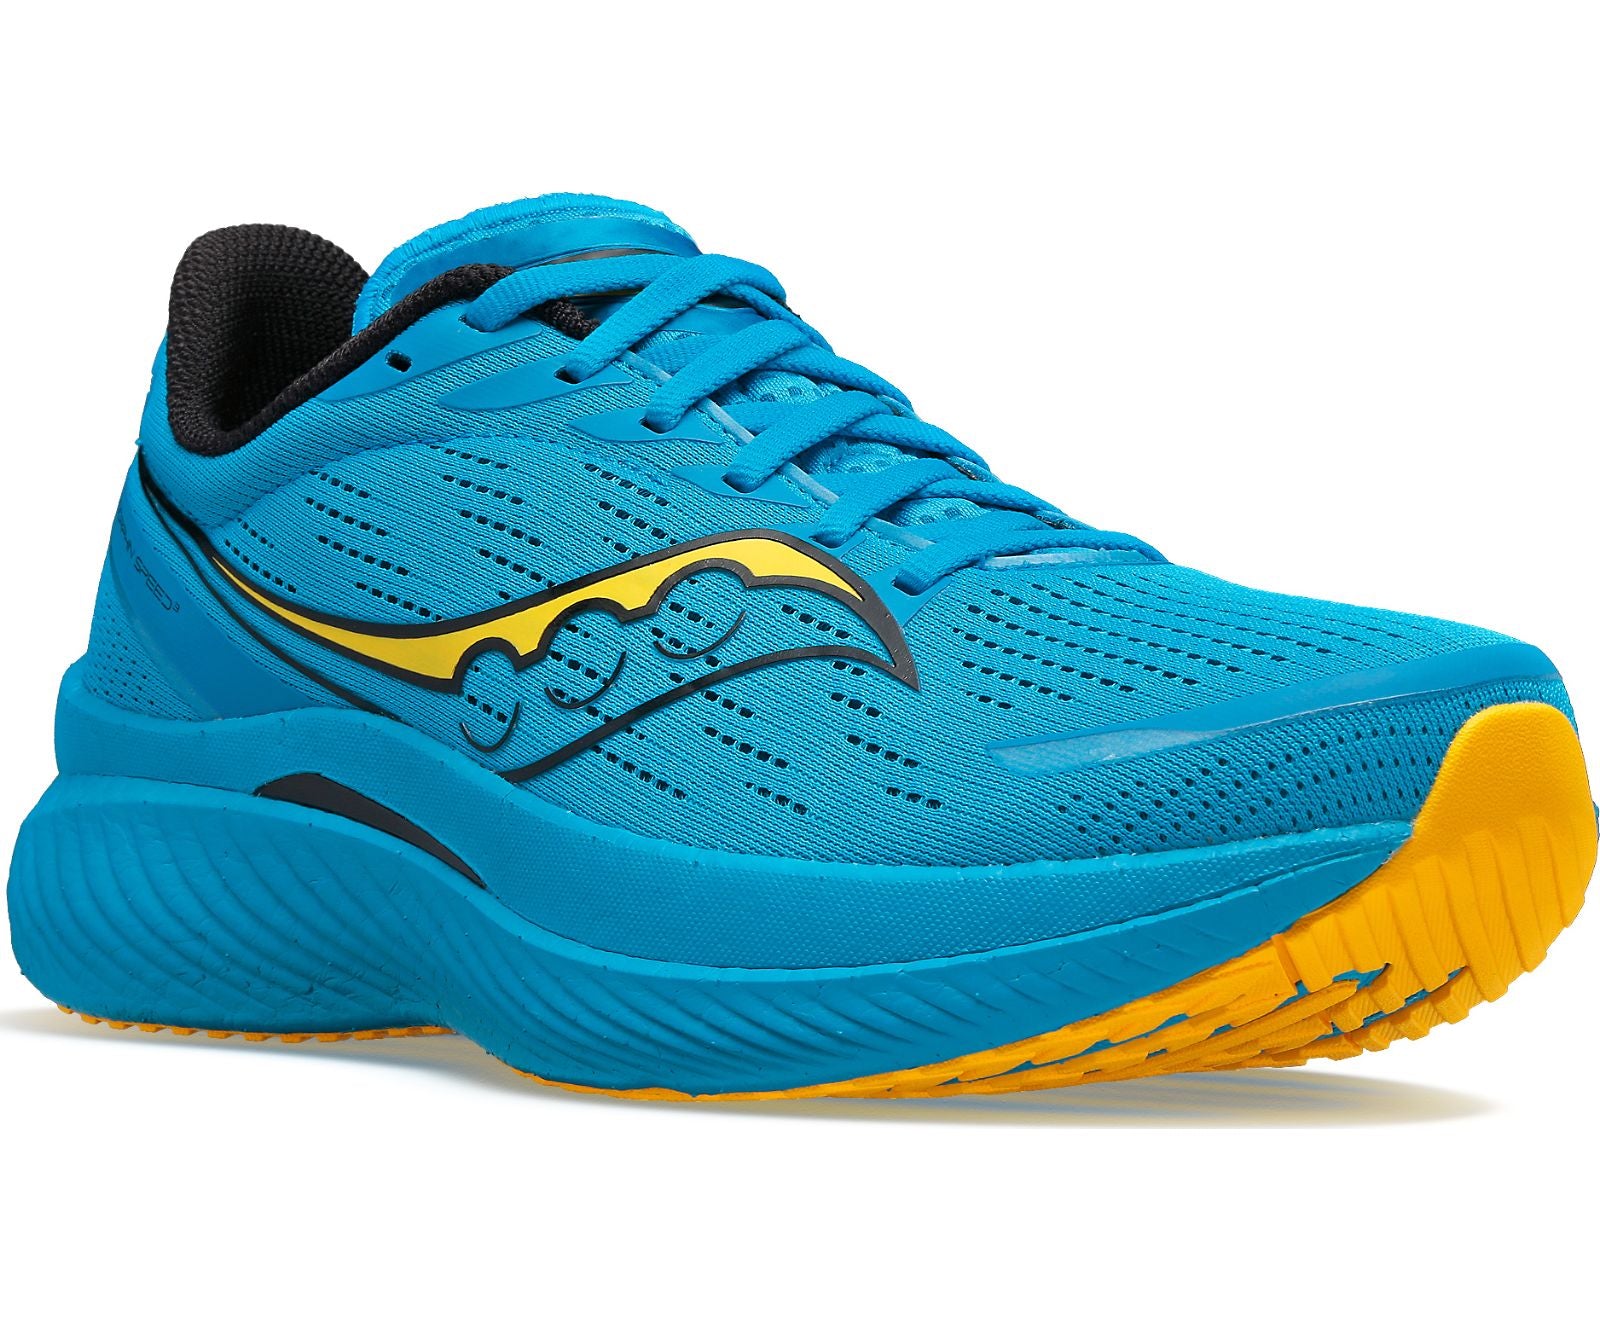 Front angle view of the Men's Saucony Endorphin Speed 3 in the color ocean/vizigold